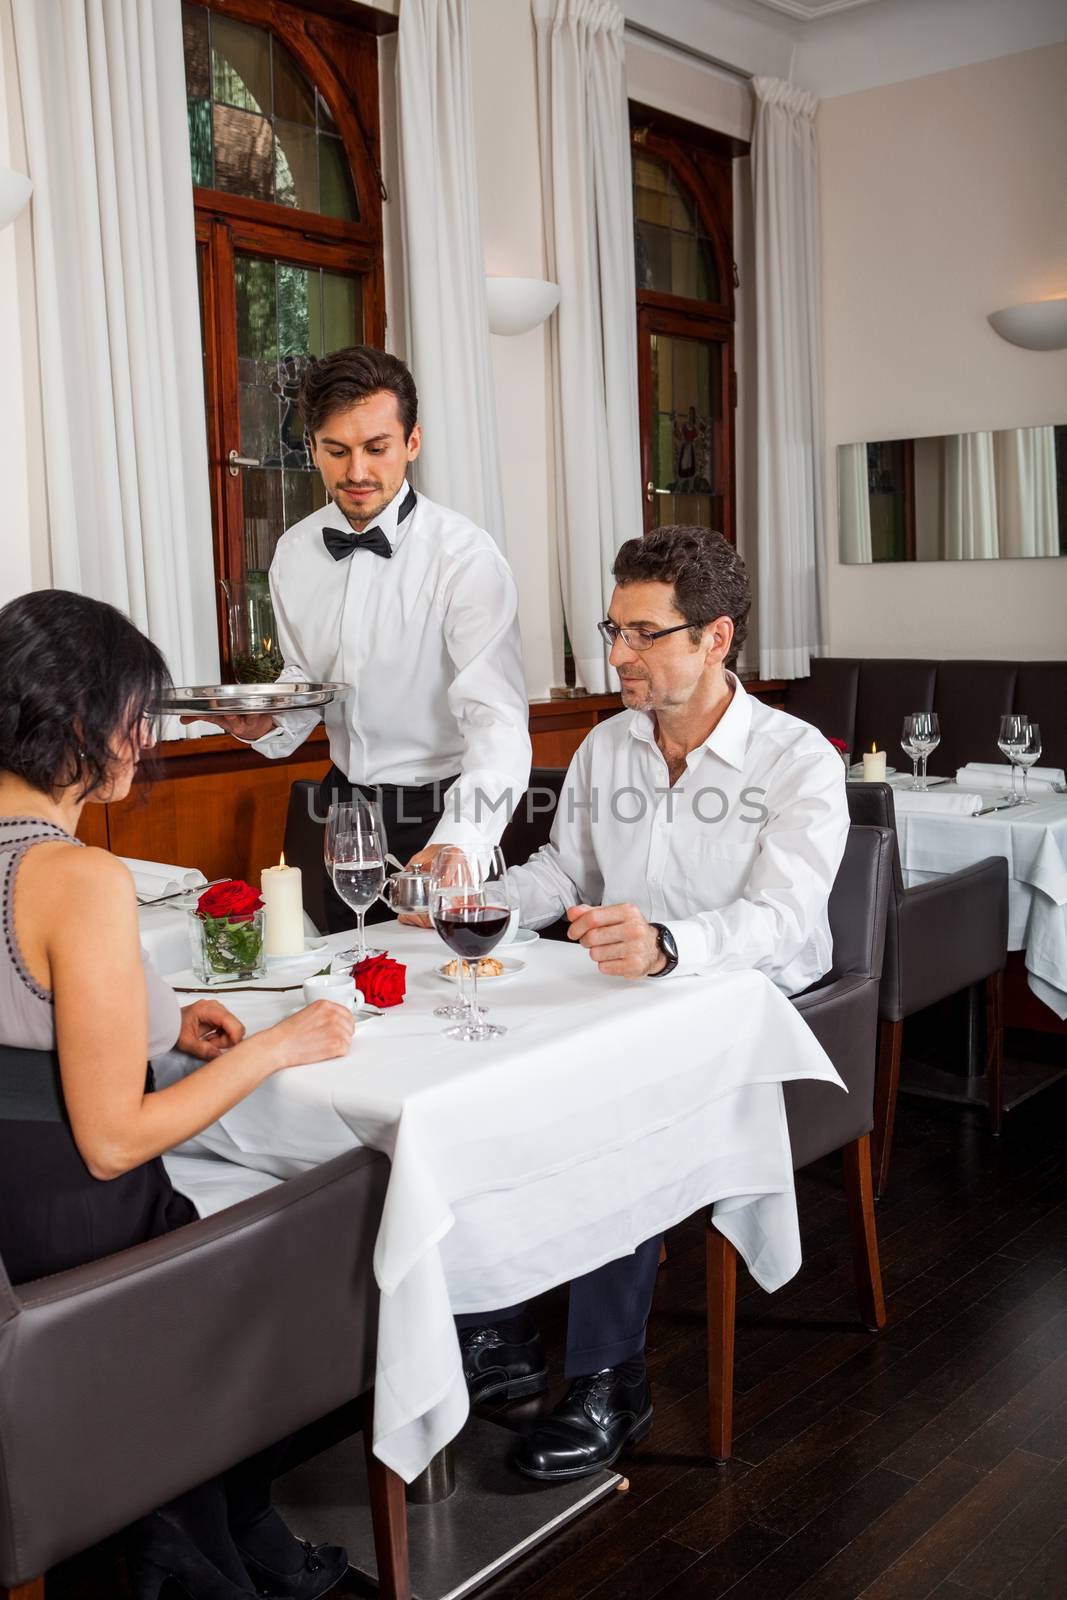 Waiter happily accommodating couple with a big smile on his face